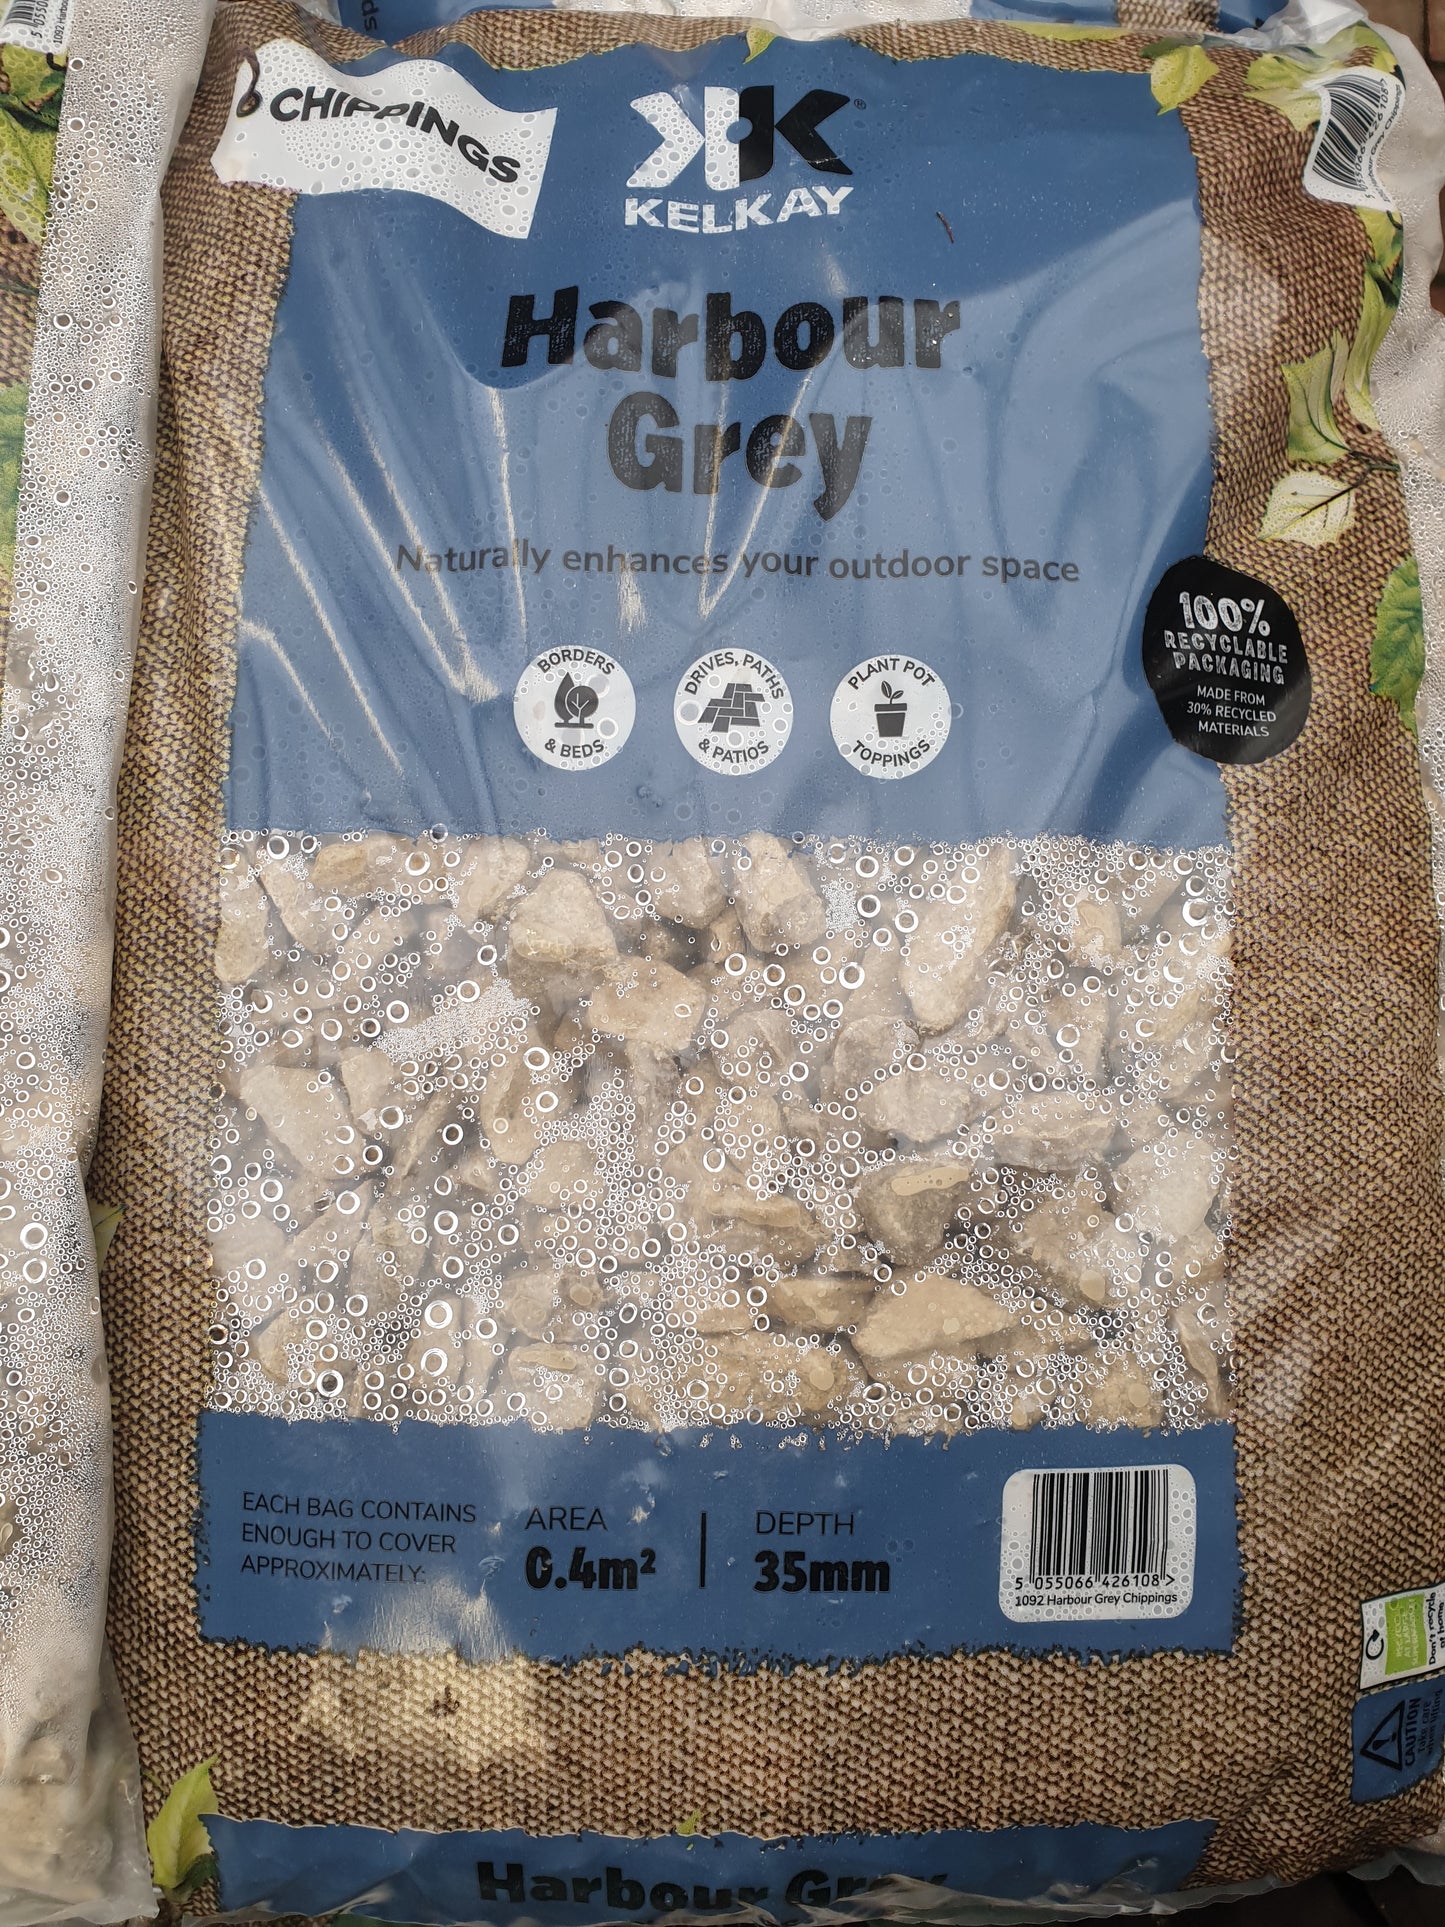 Harbor Grey Chippings